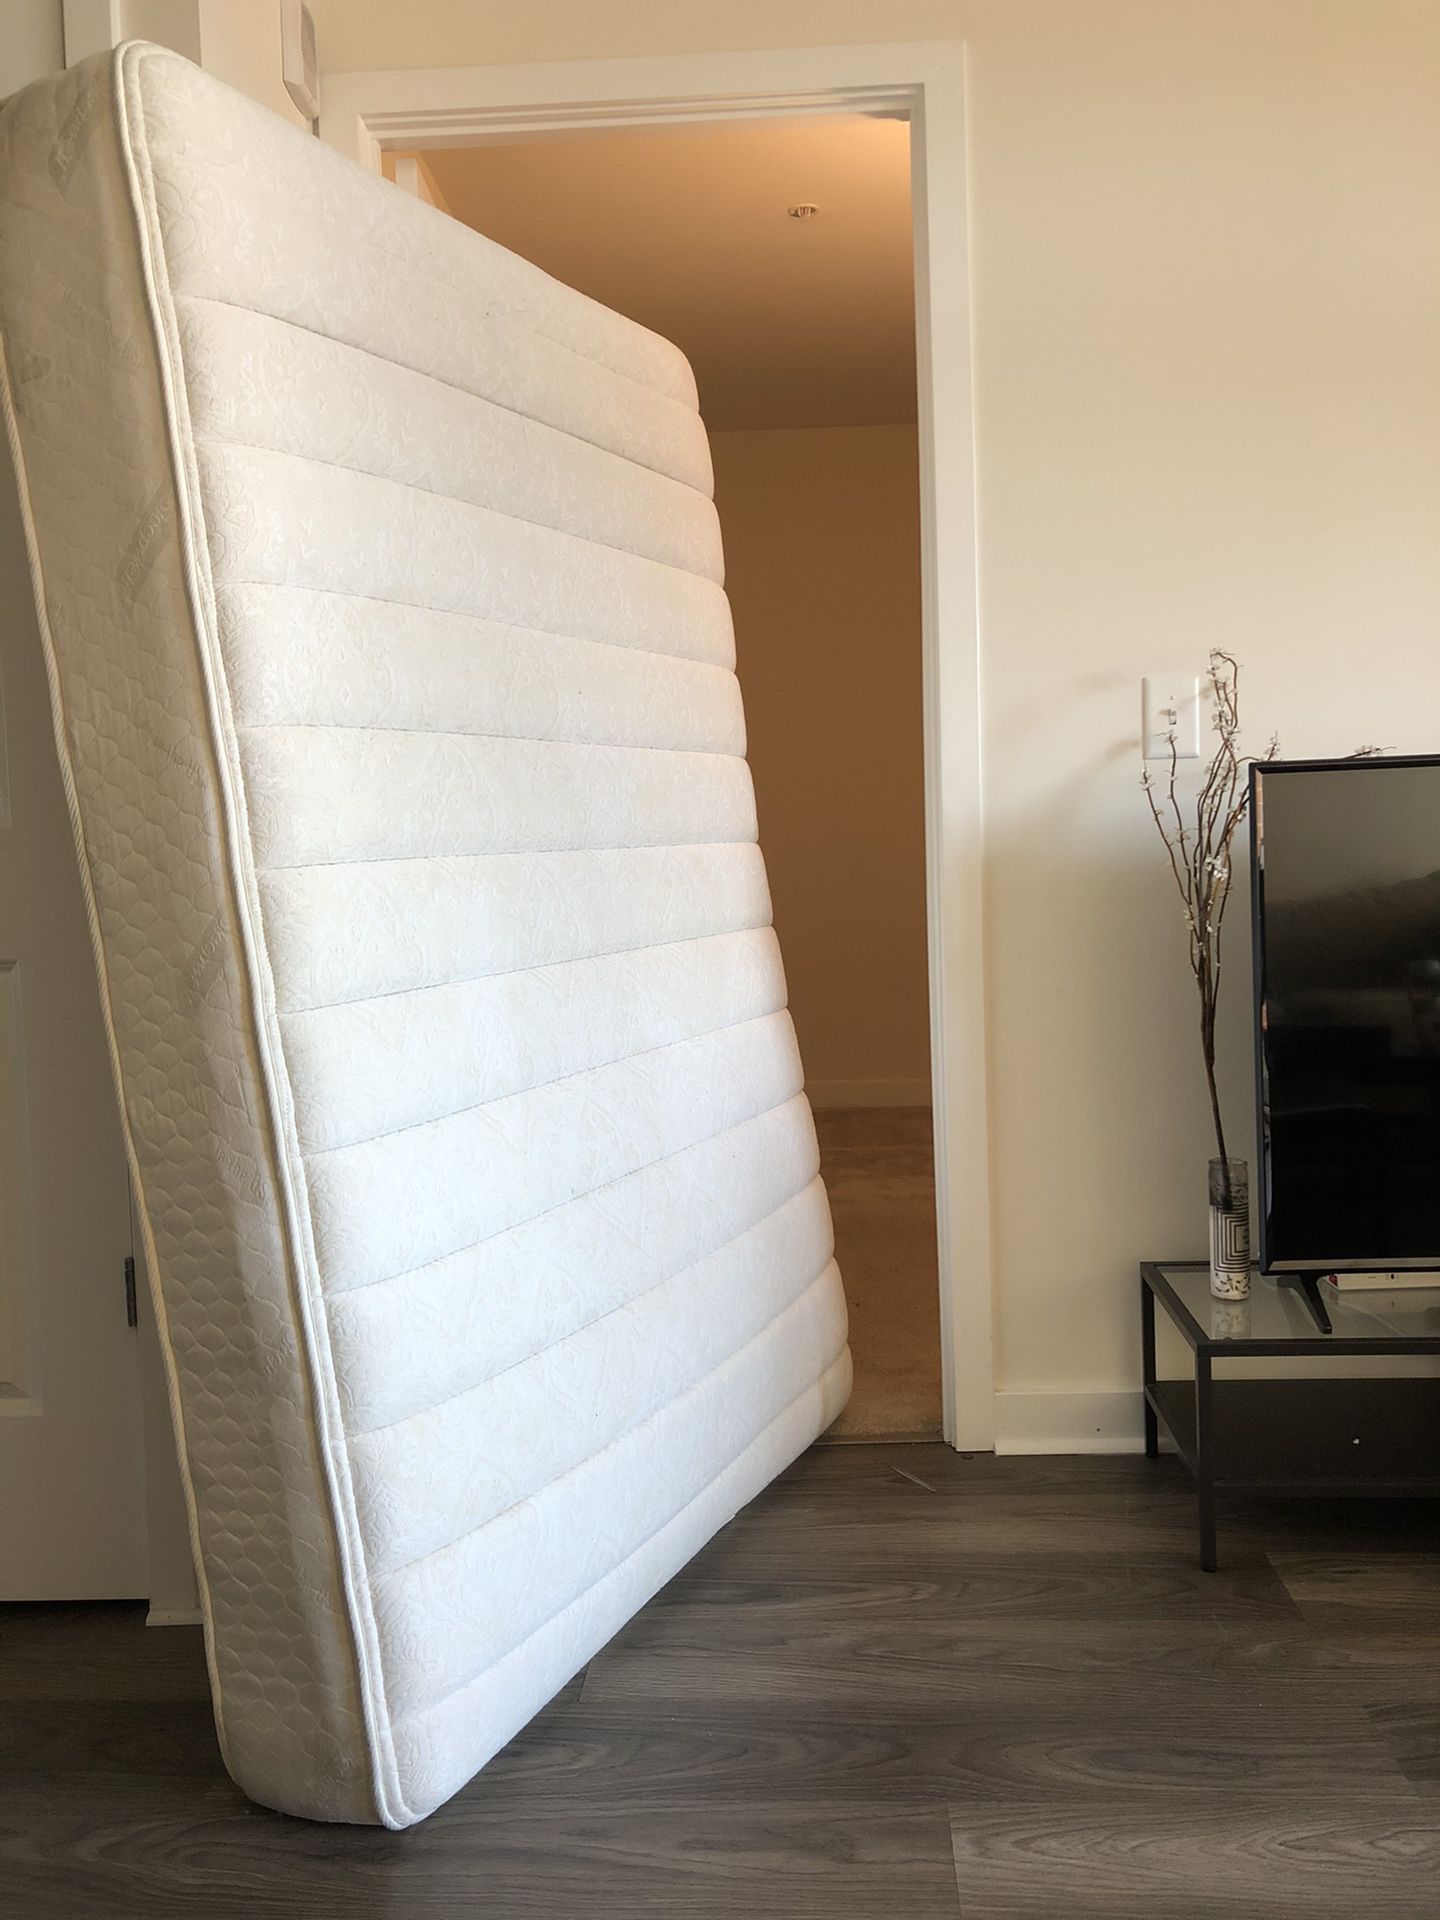 FULL SIZE MATTRESS & BOX SPRING (-$50 OFF if picked up this week)